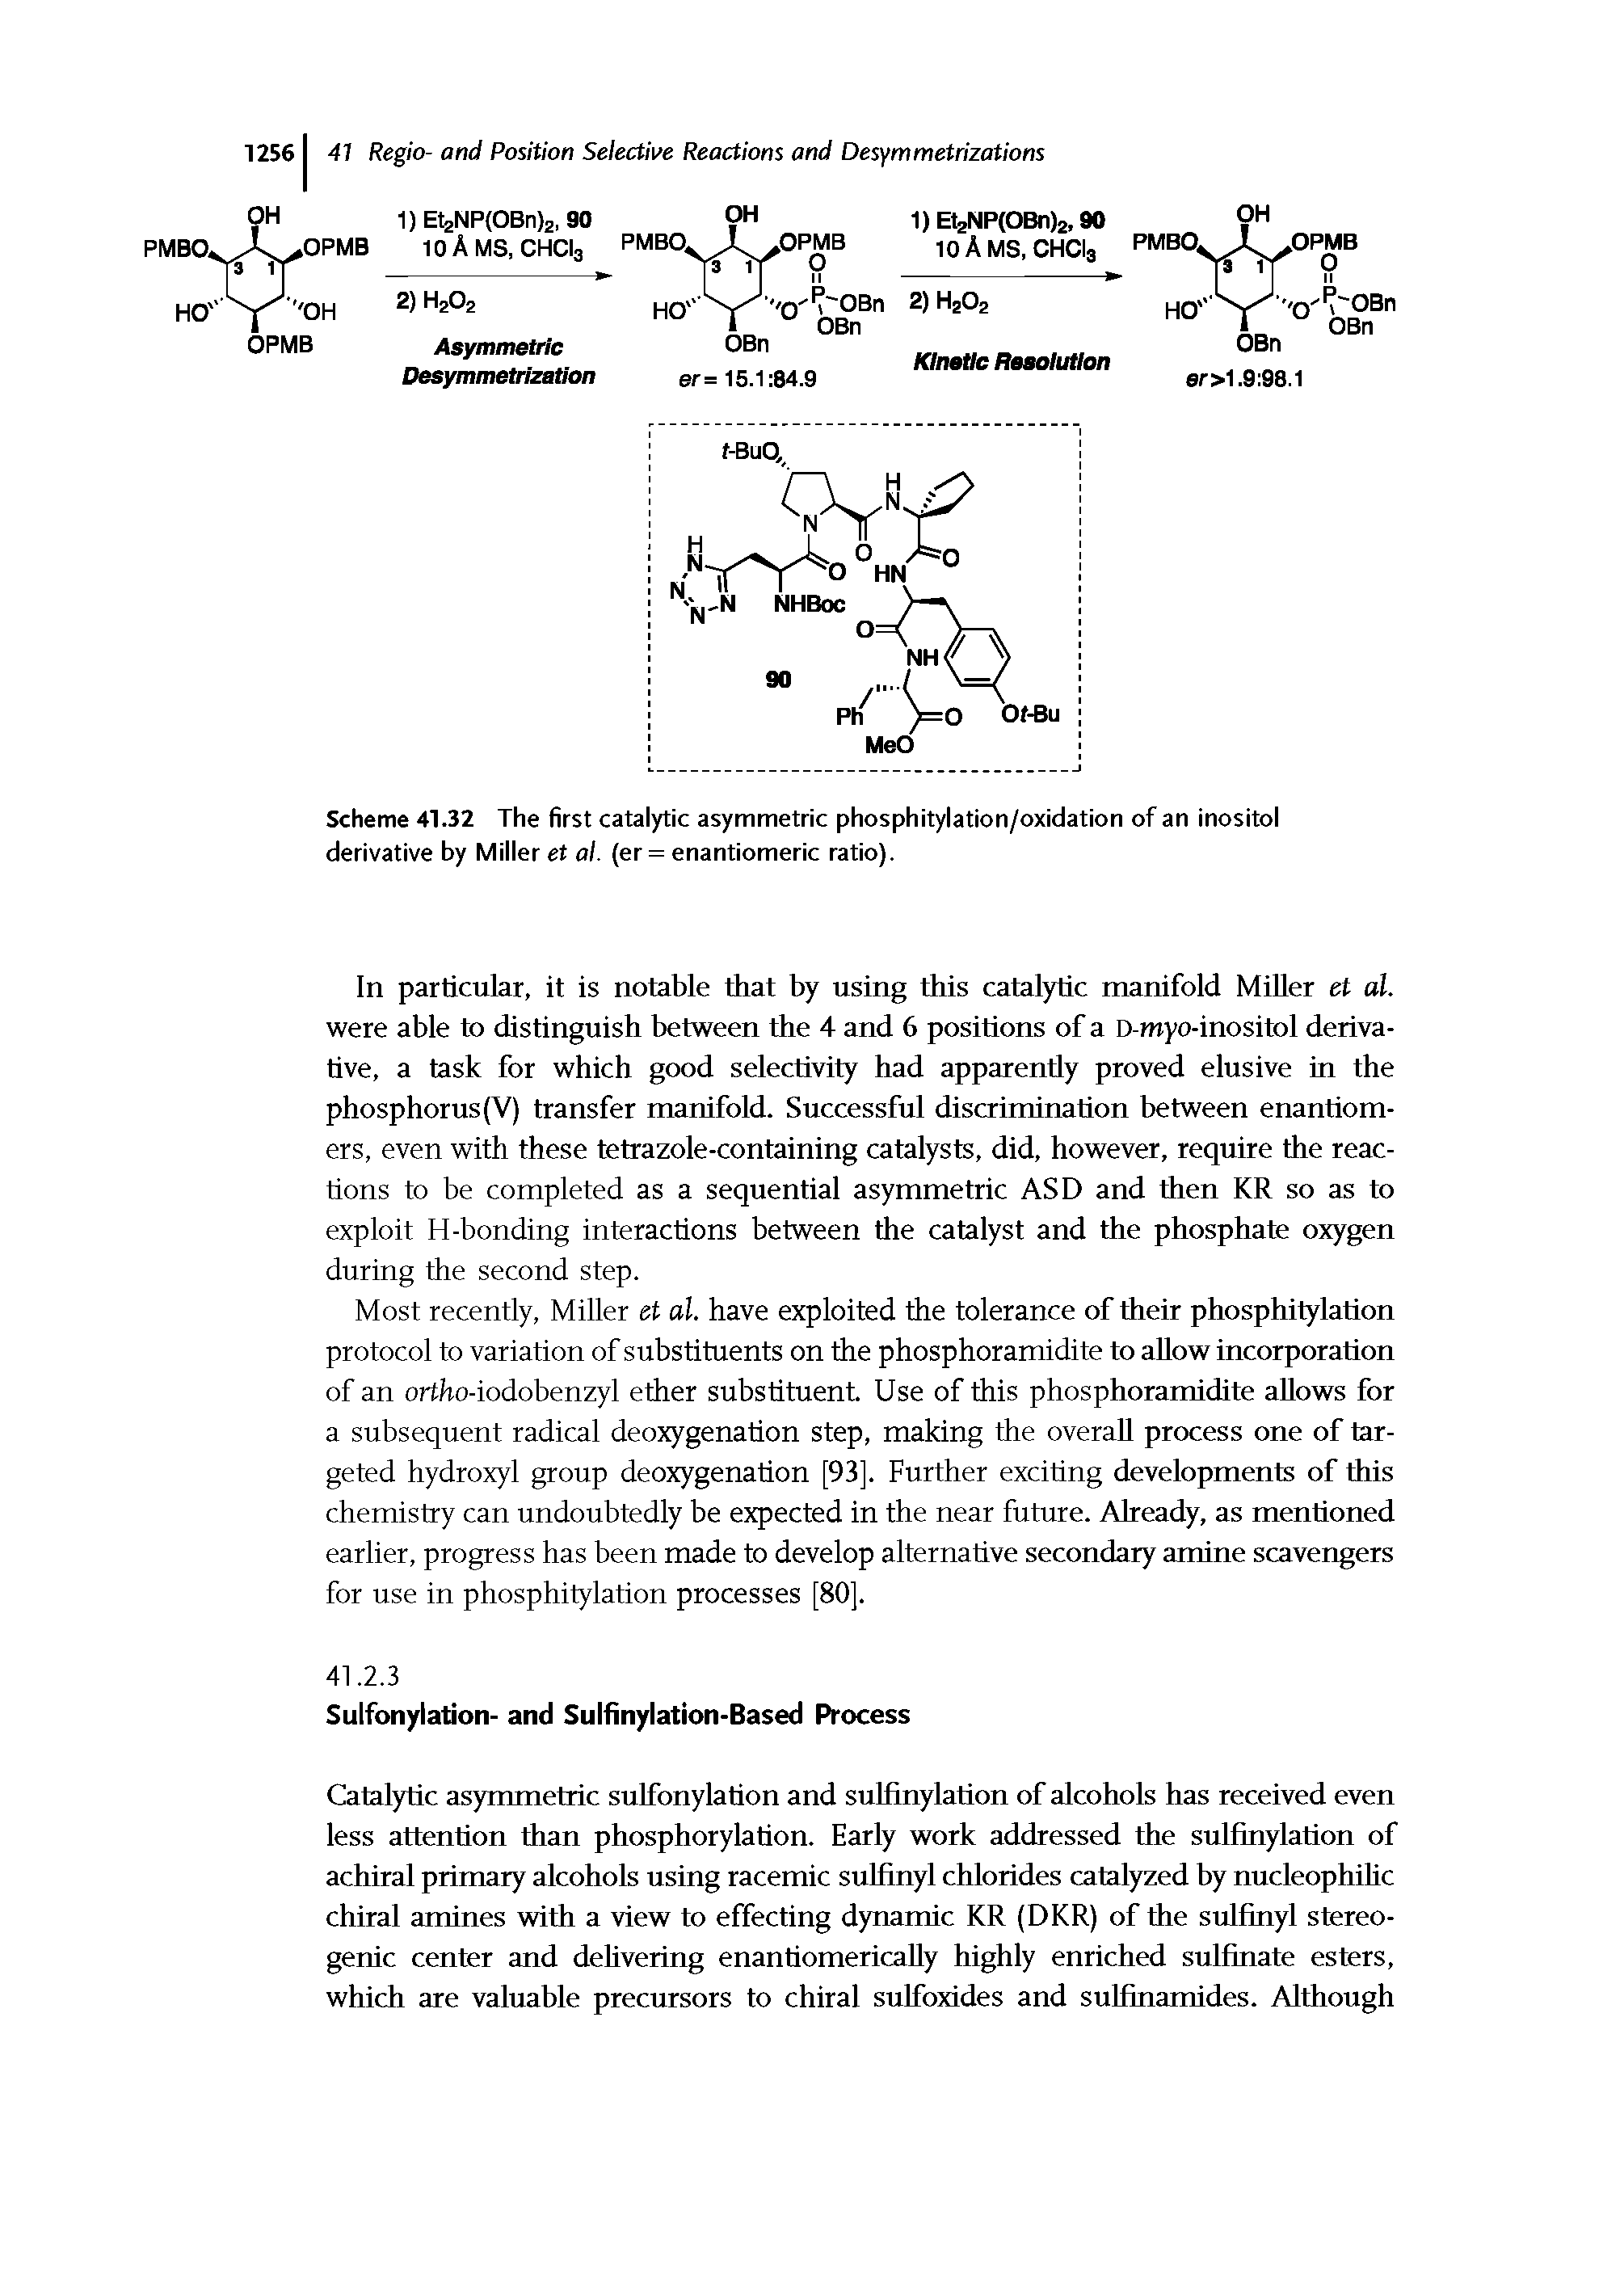 Scheme 41.32 The first catalytic asymmetric phosphitylation/oxidation of an inositol derivative by Miller et at. (er = enantiomeric ratio).